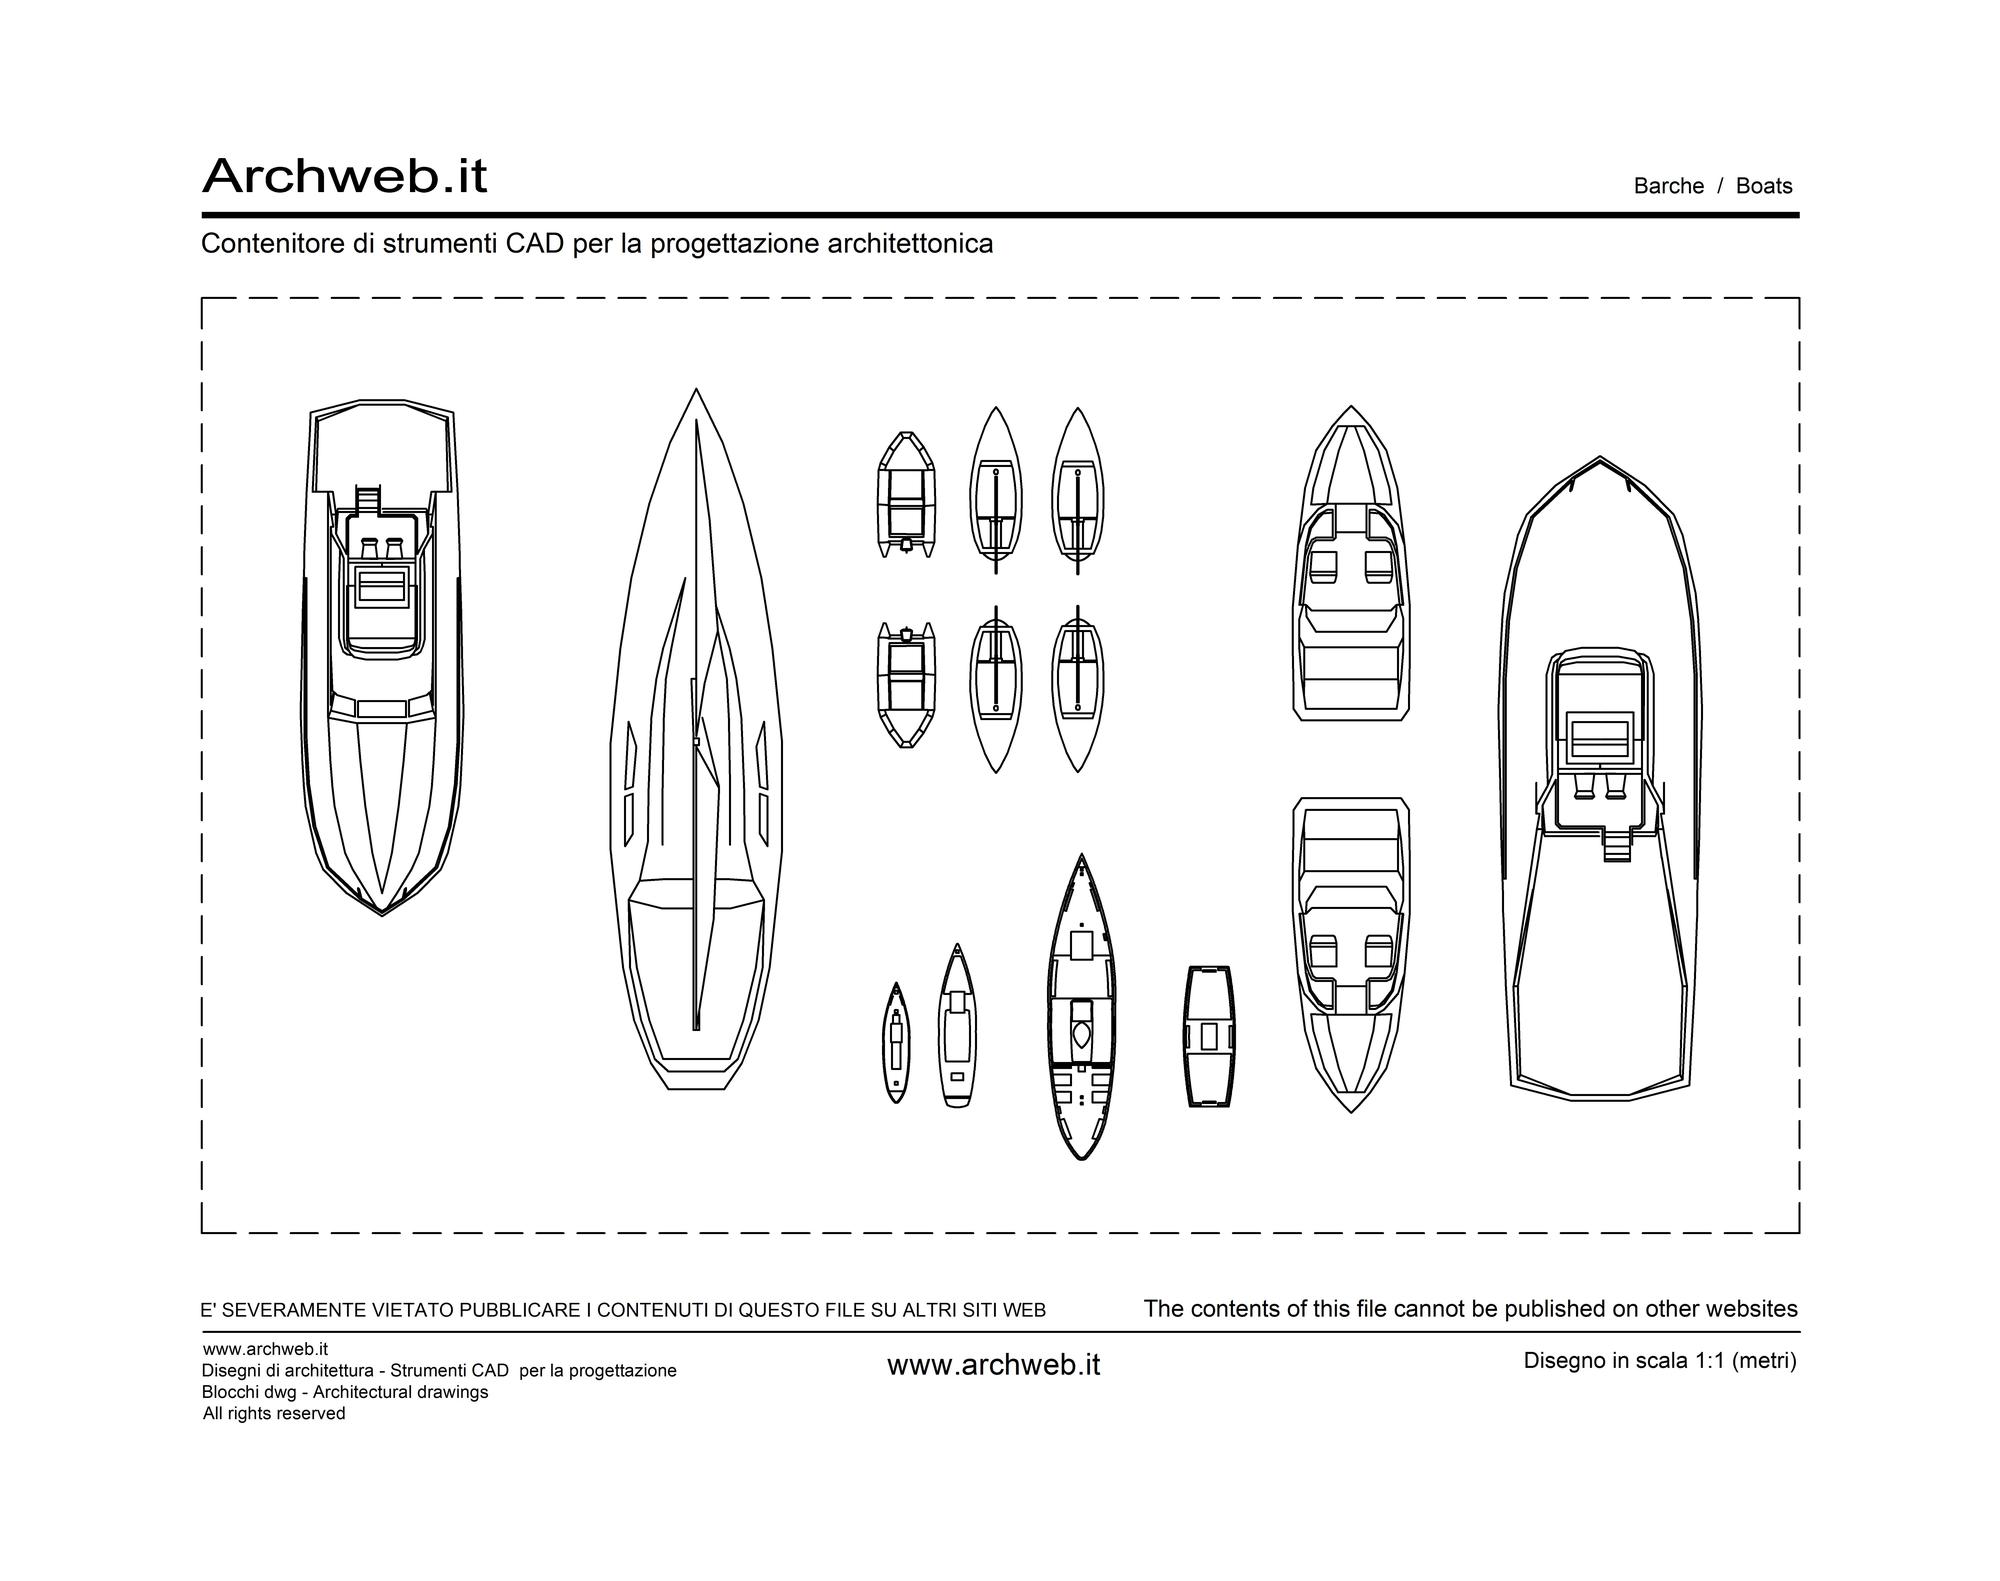 Plan drawing of the various boats